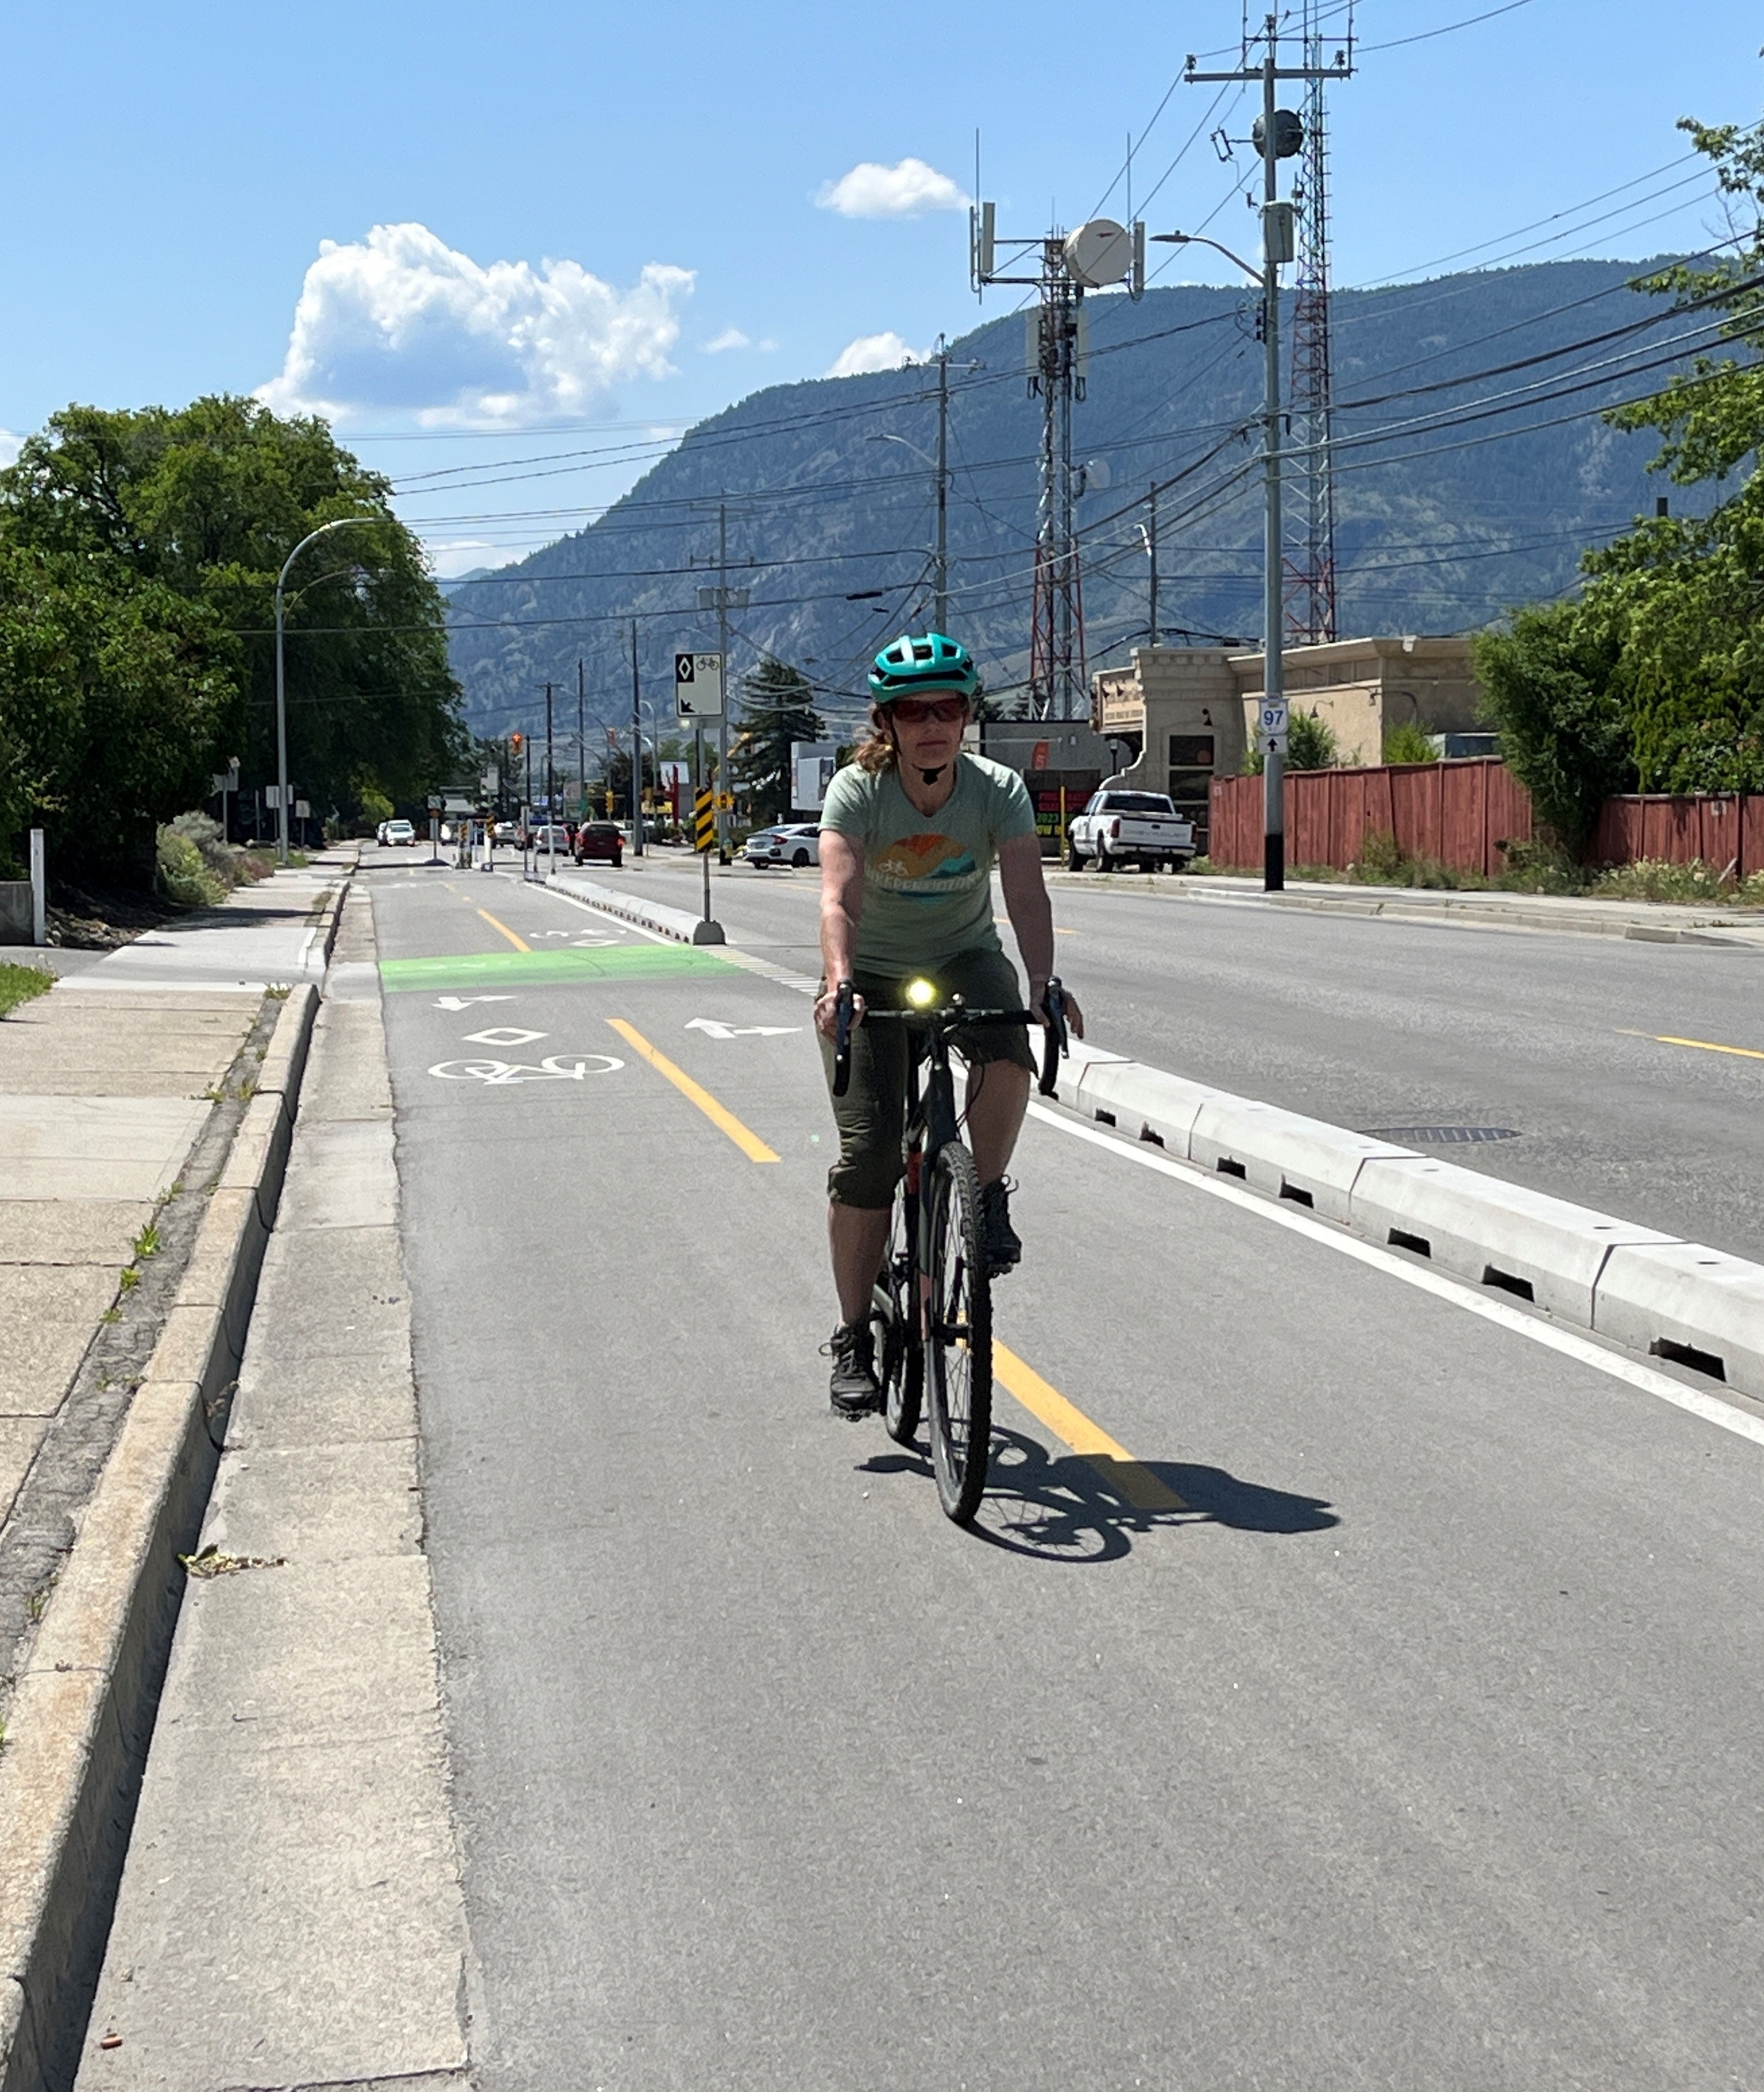 A person in a green bike helmet, green tshirt and short pants rides in a bike lane with mountains in the background